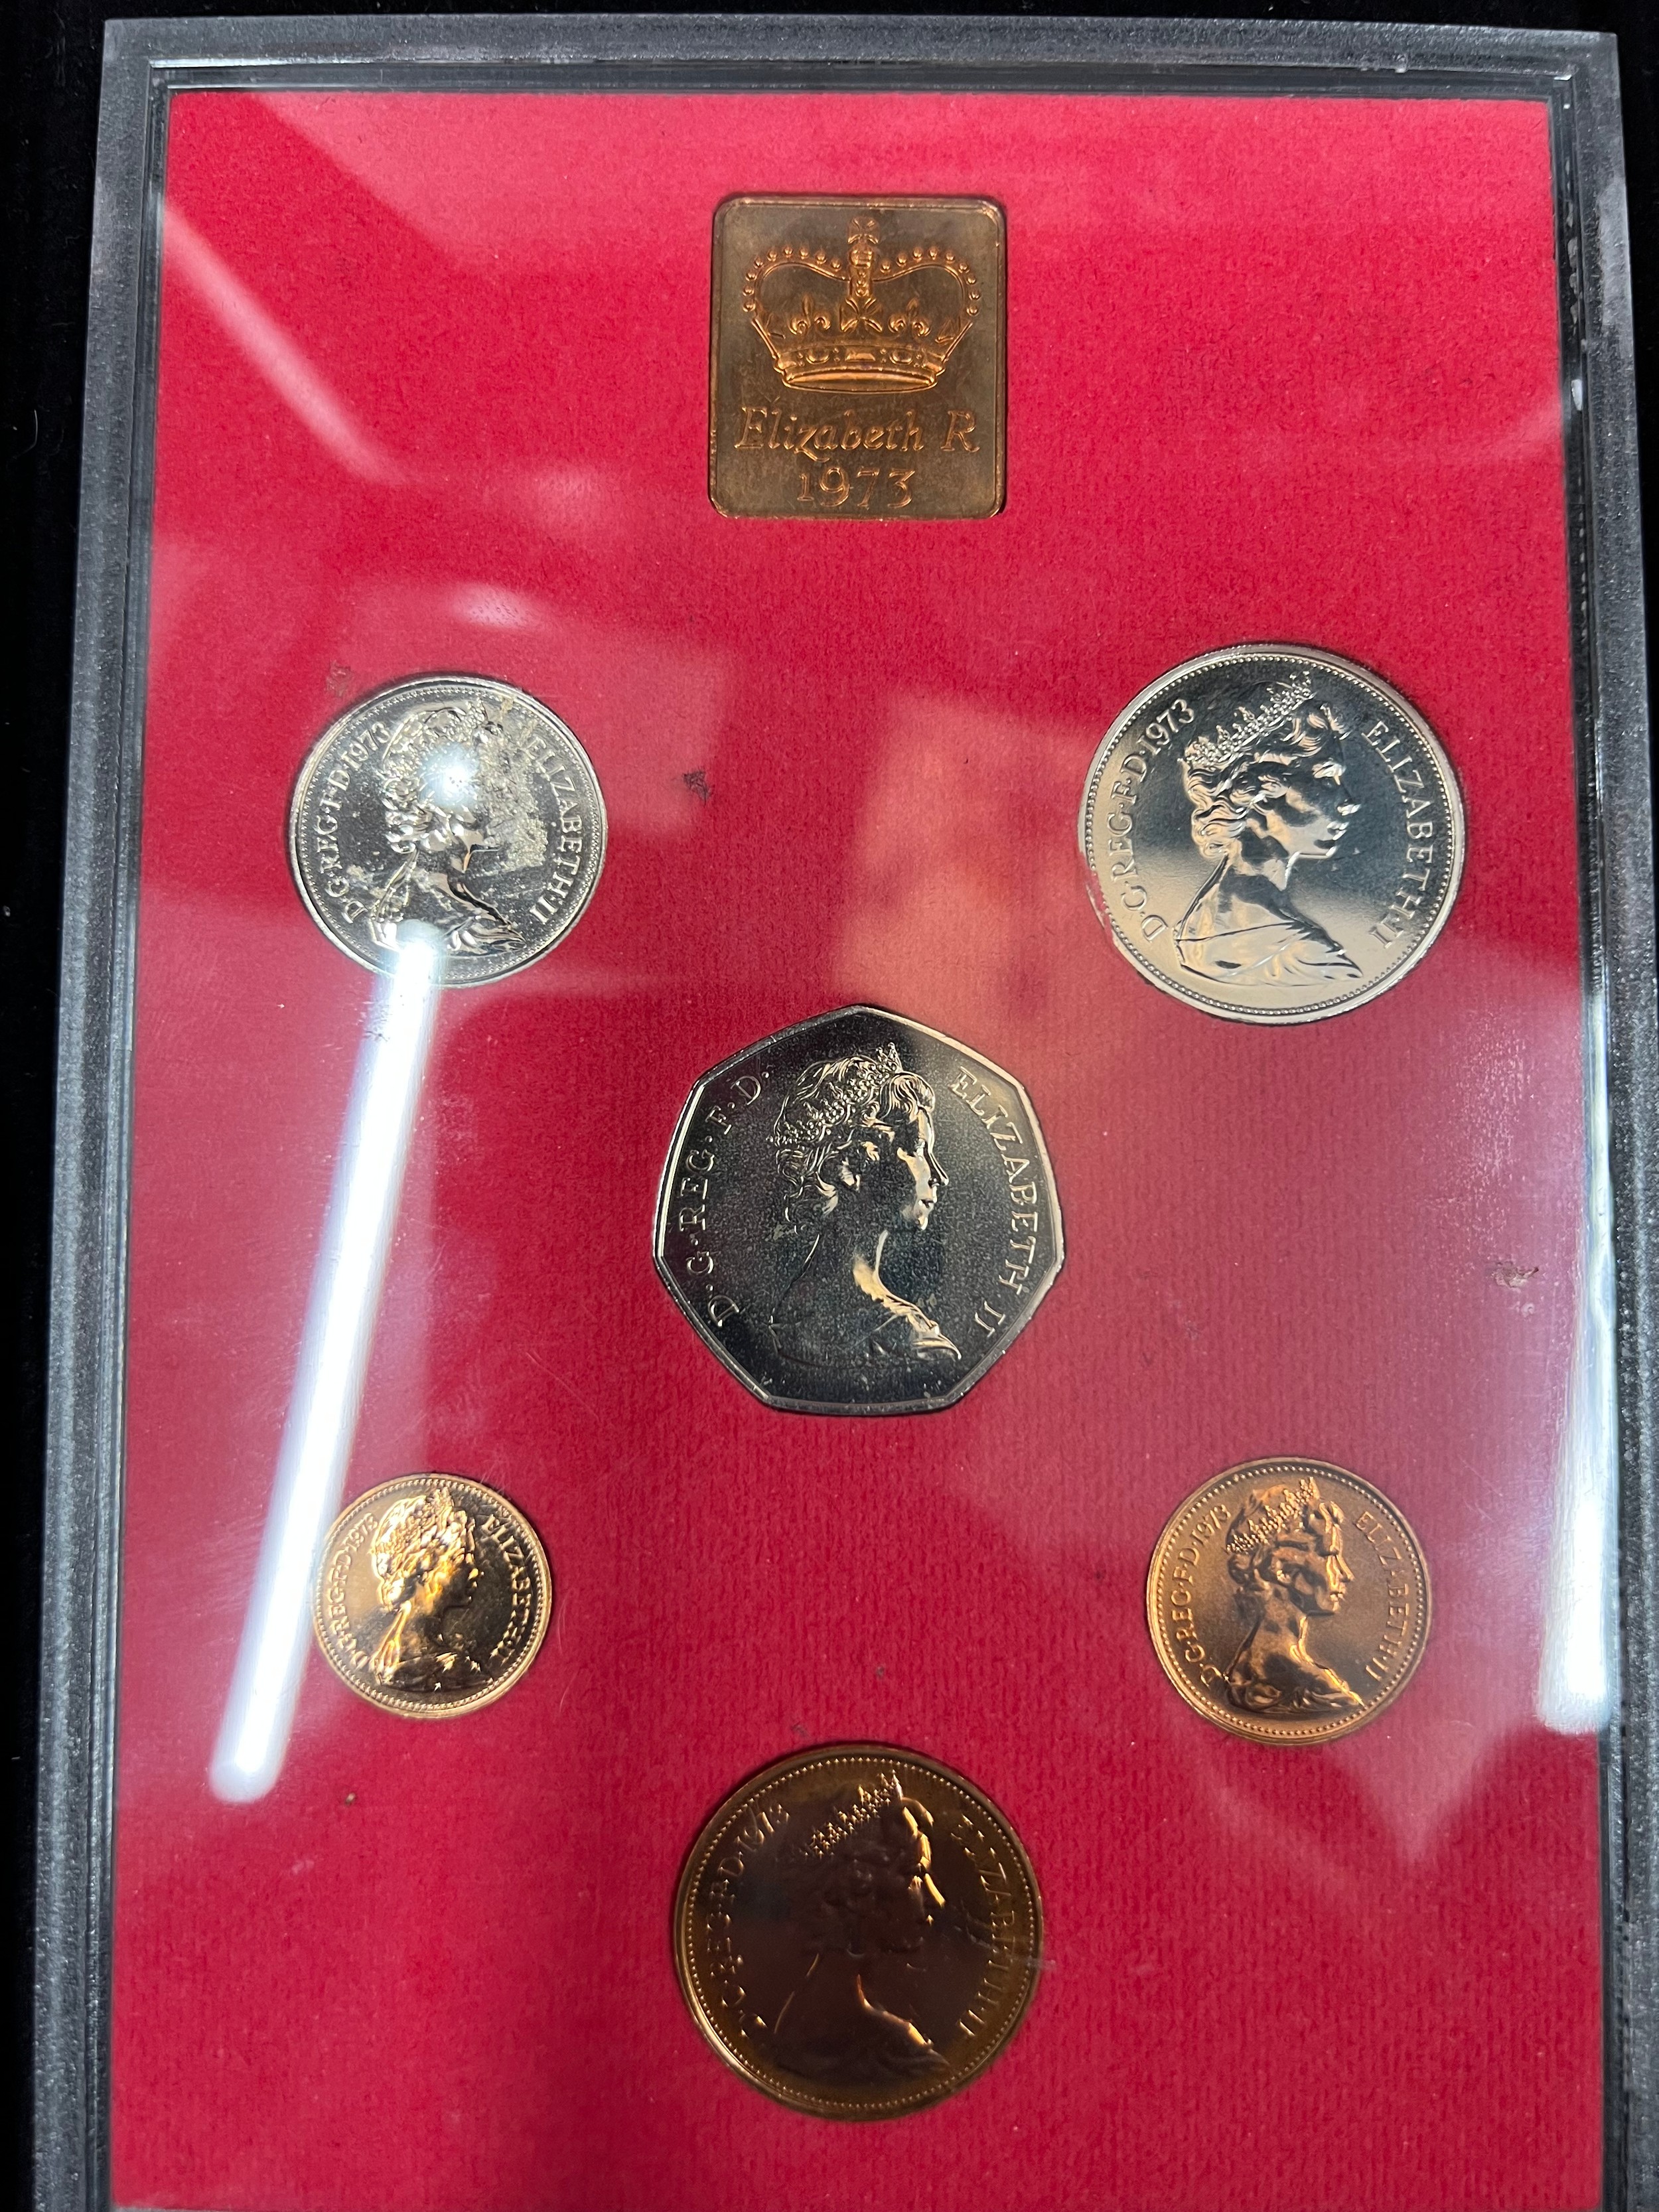 Royal mint proof sets x 3 to include 1973, 1981, 1982 in with presentation case, certificates for 81 - Image 2 of 4